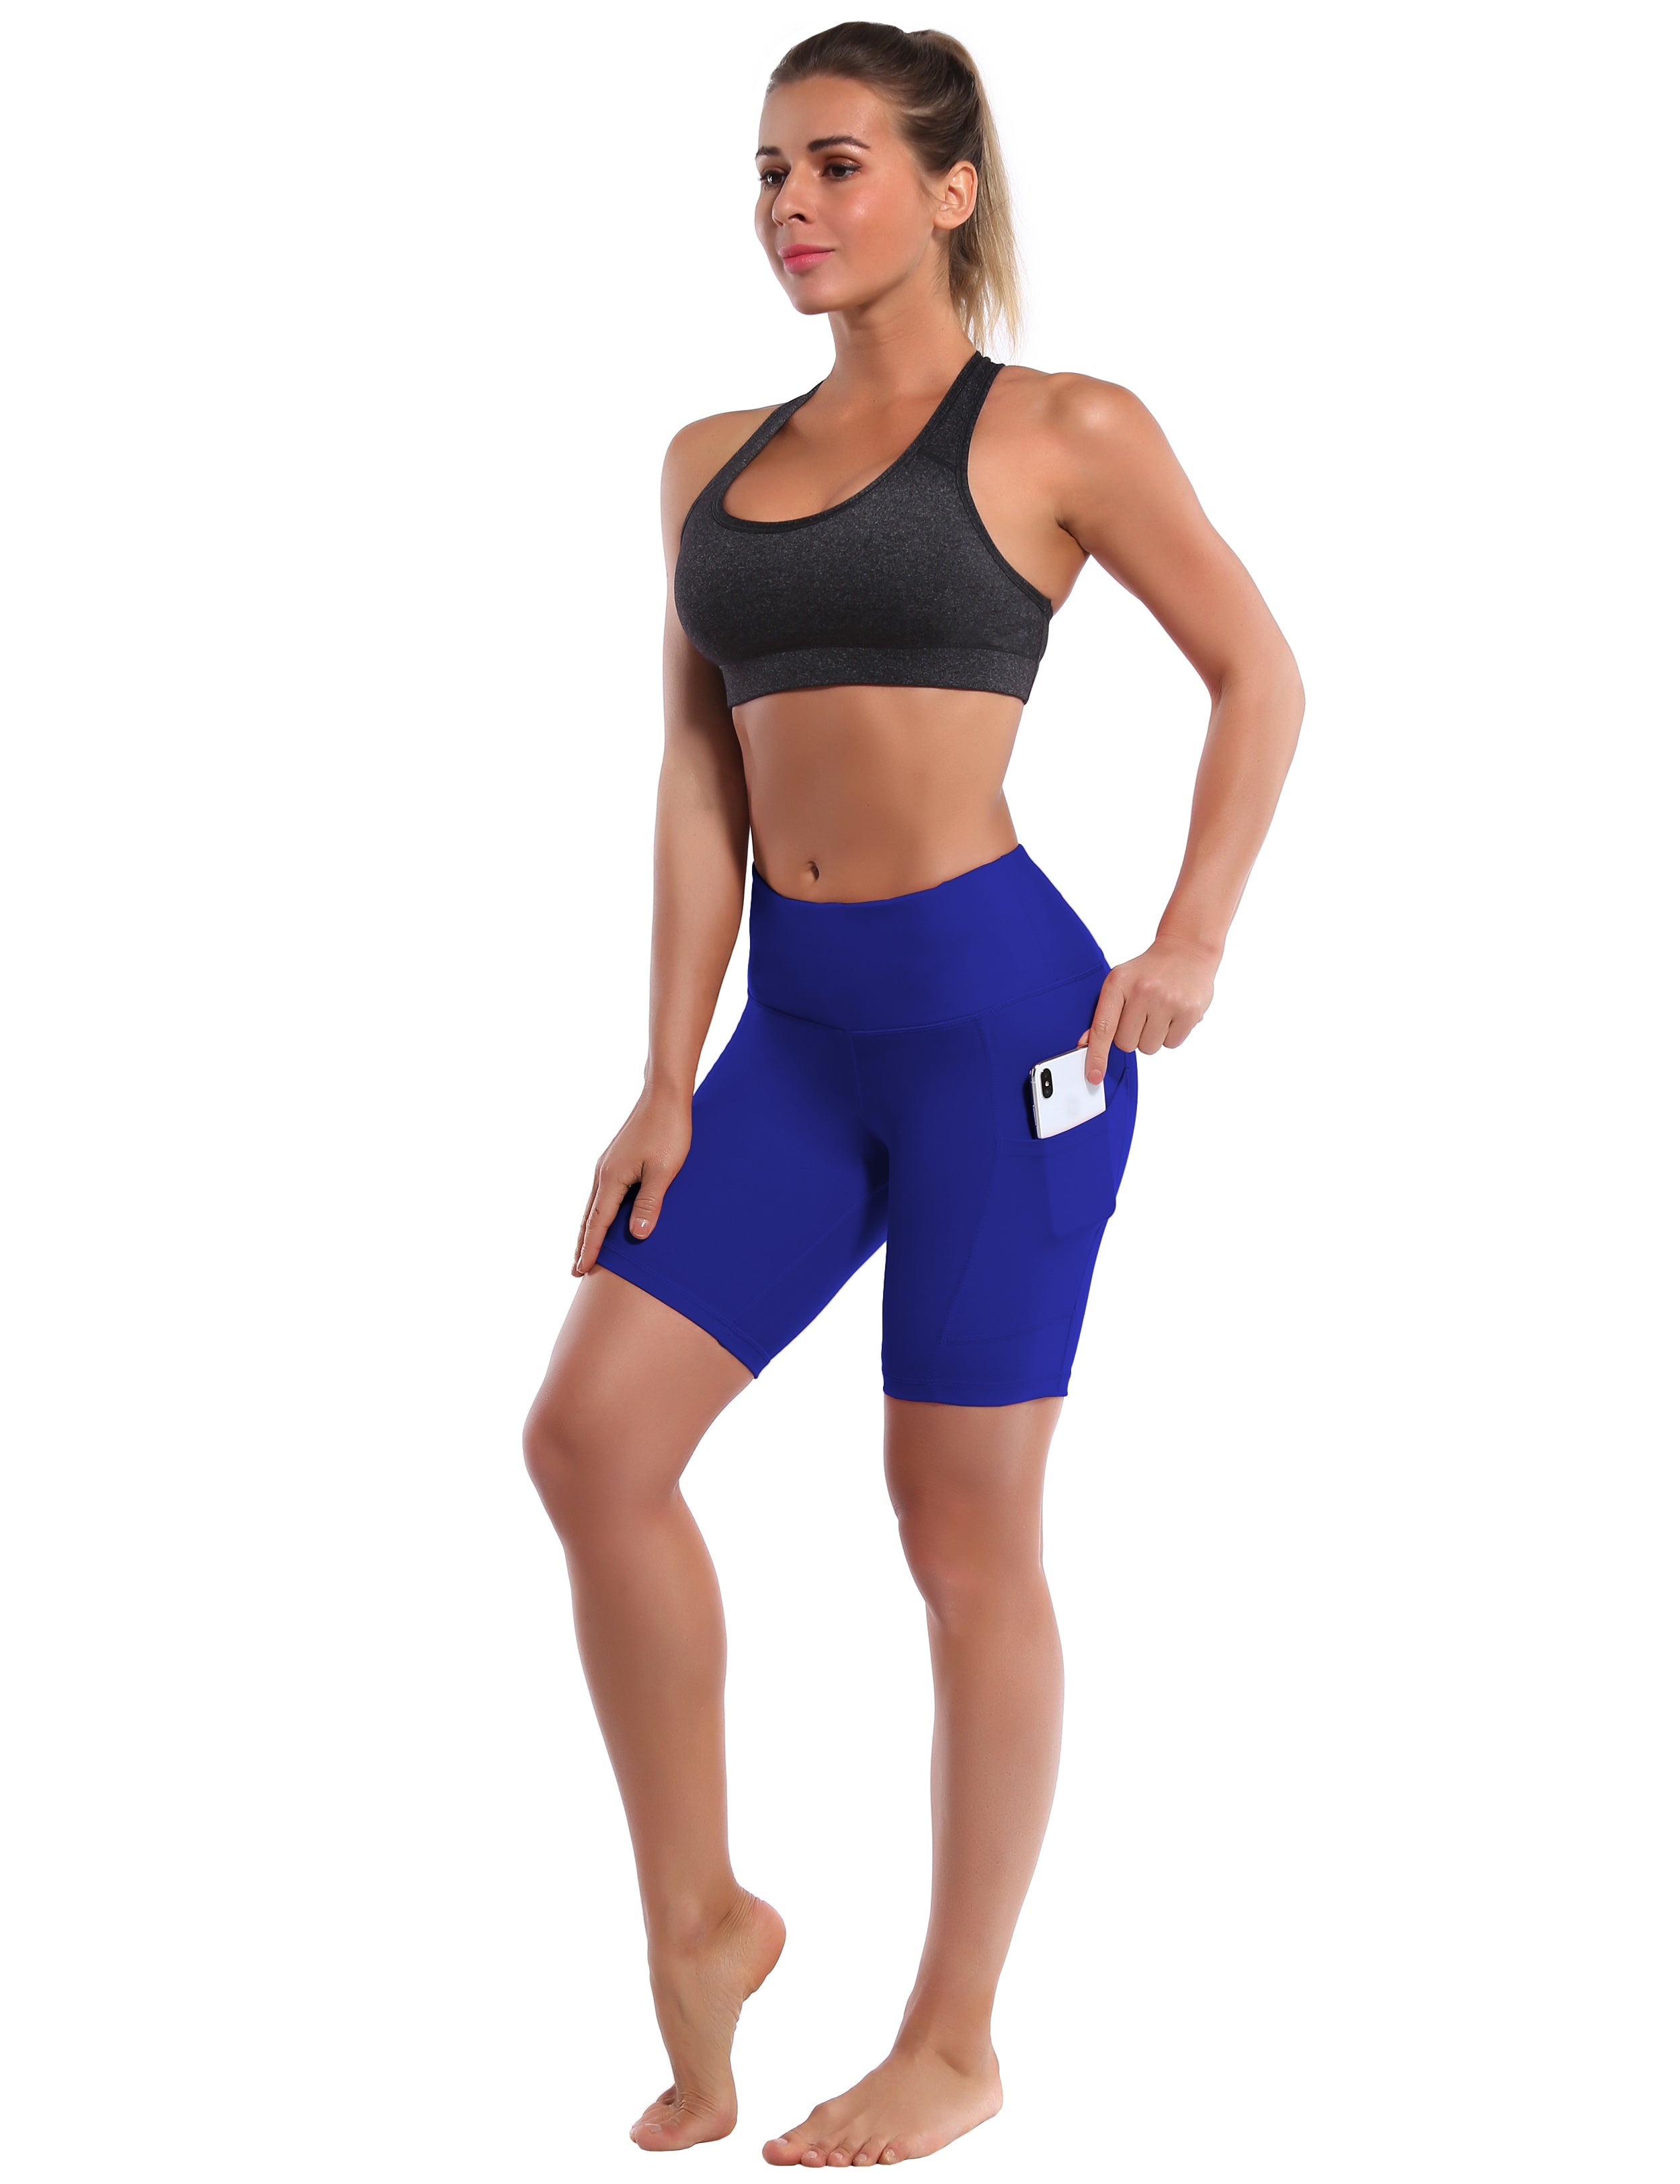 8" Side Pockets Gym Shorts navy Sleek, soft, smooth and totally comfortable: our newest style is here. Softest-ever fabric High elasticity High density 4-way stretch Fabric doesn't attract lint easily No see-through Moisture-wicking Machine wash 75% Nylon, 25% Spandex